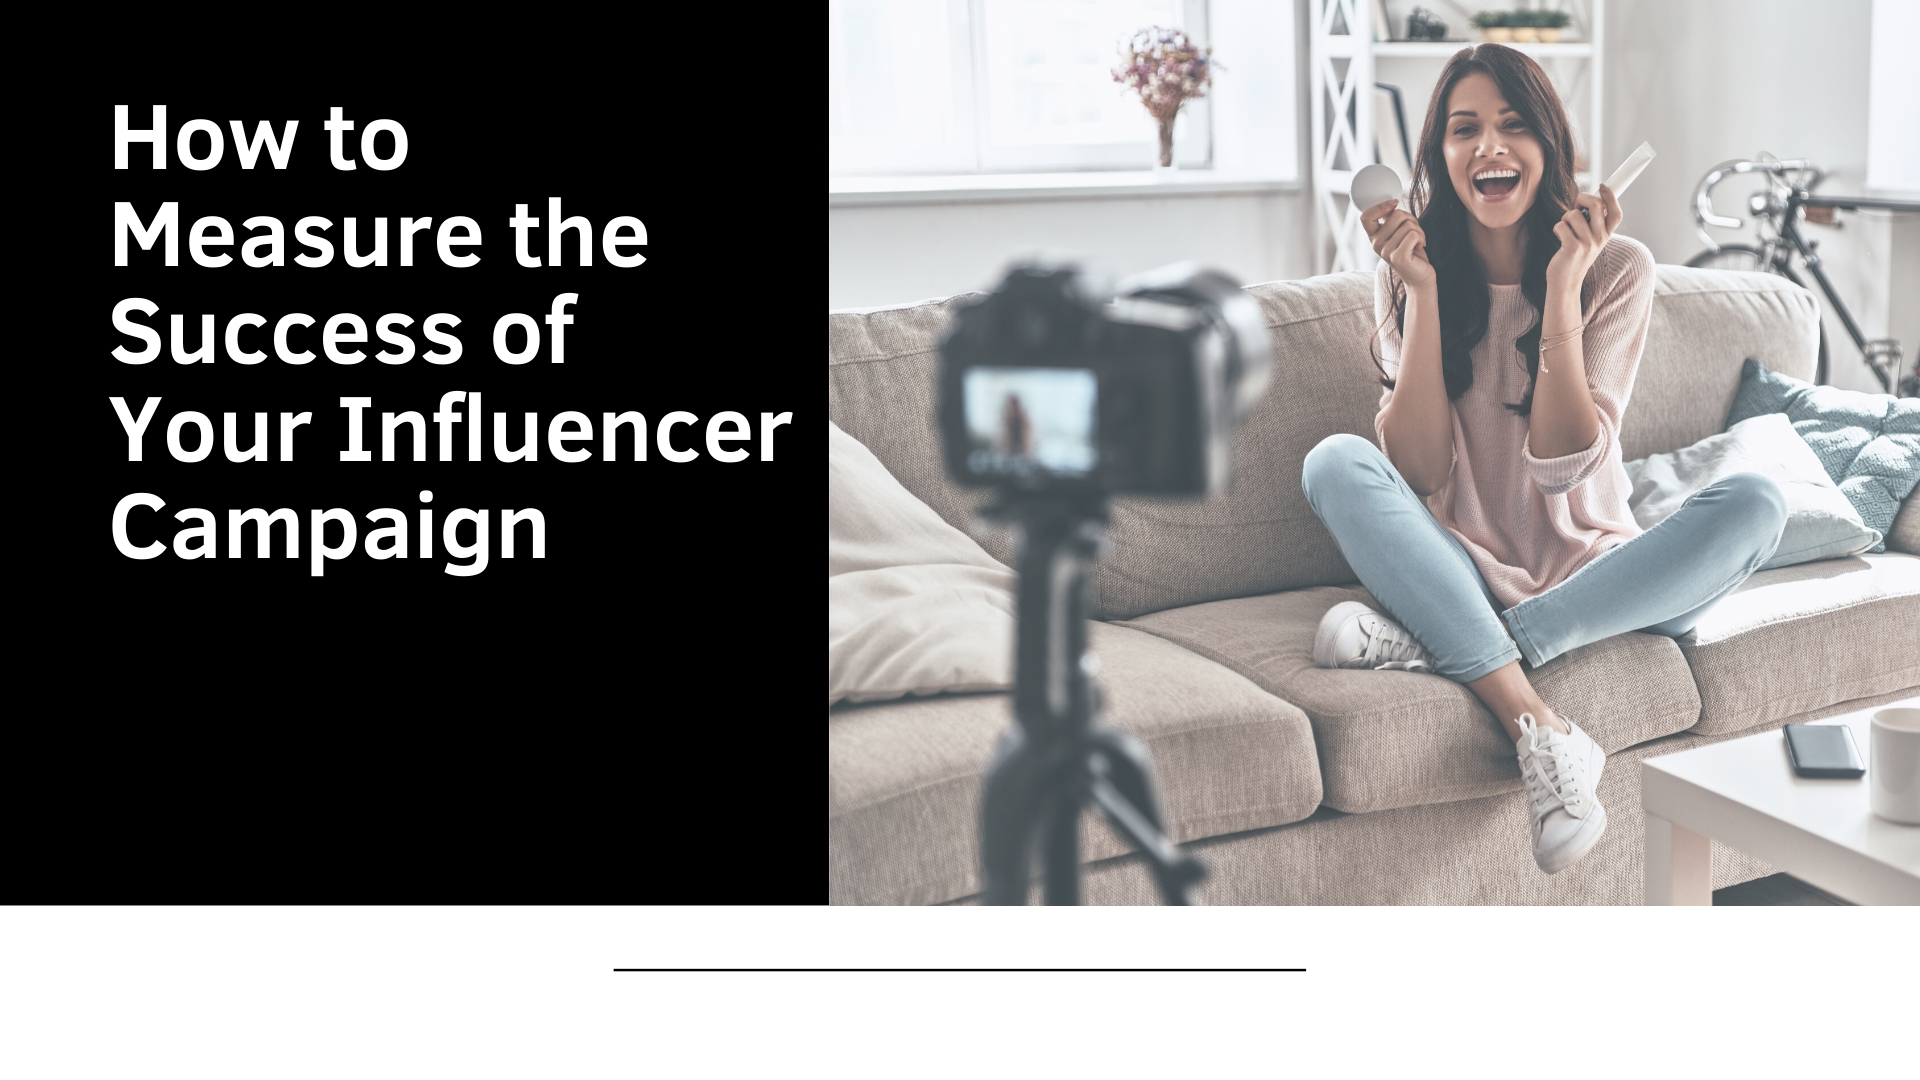 How to Measure the Success of Your Influencer Campaign